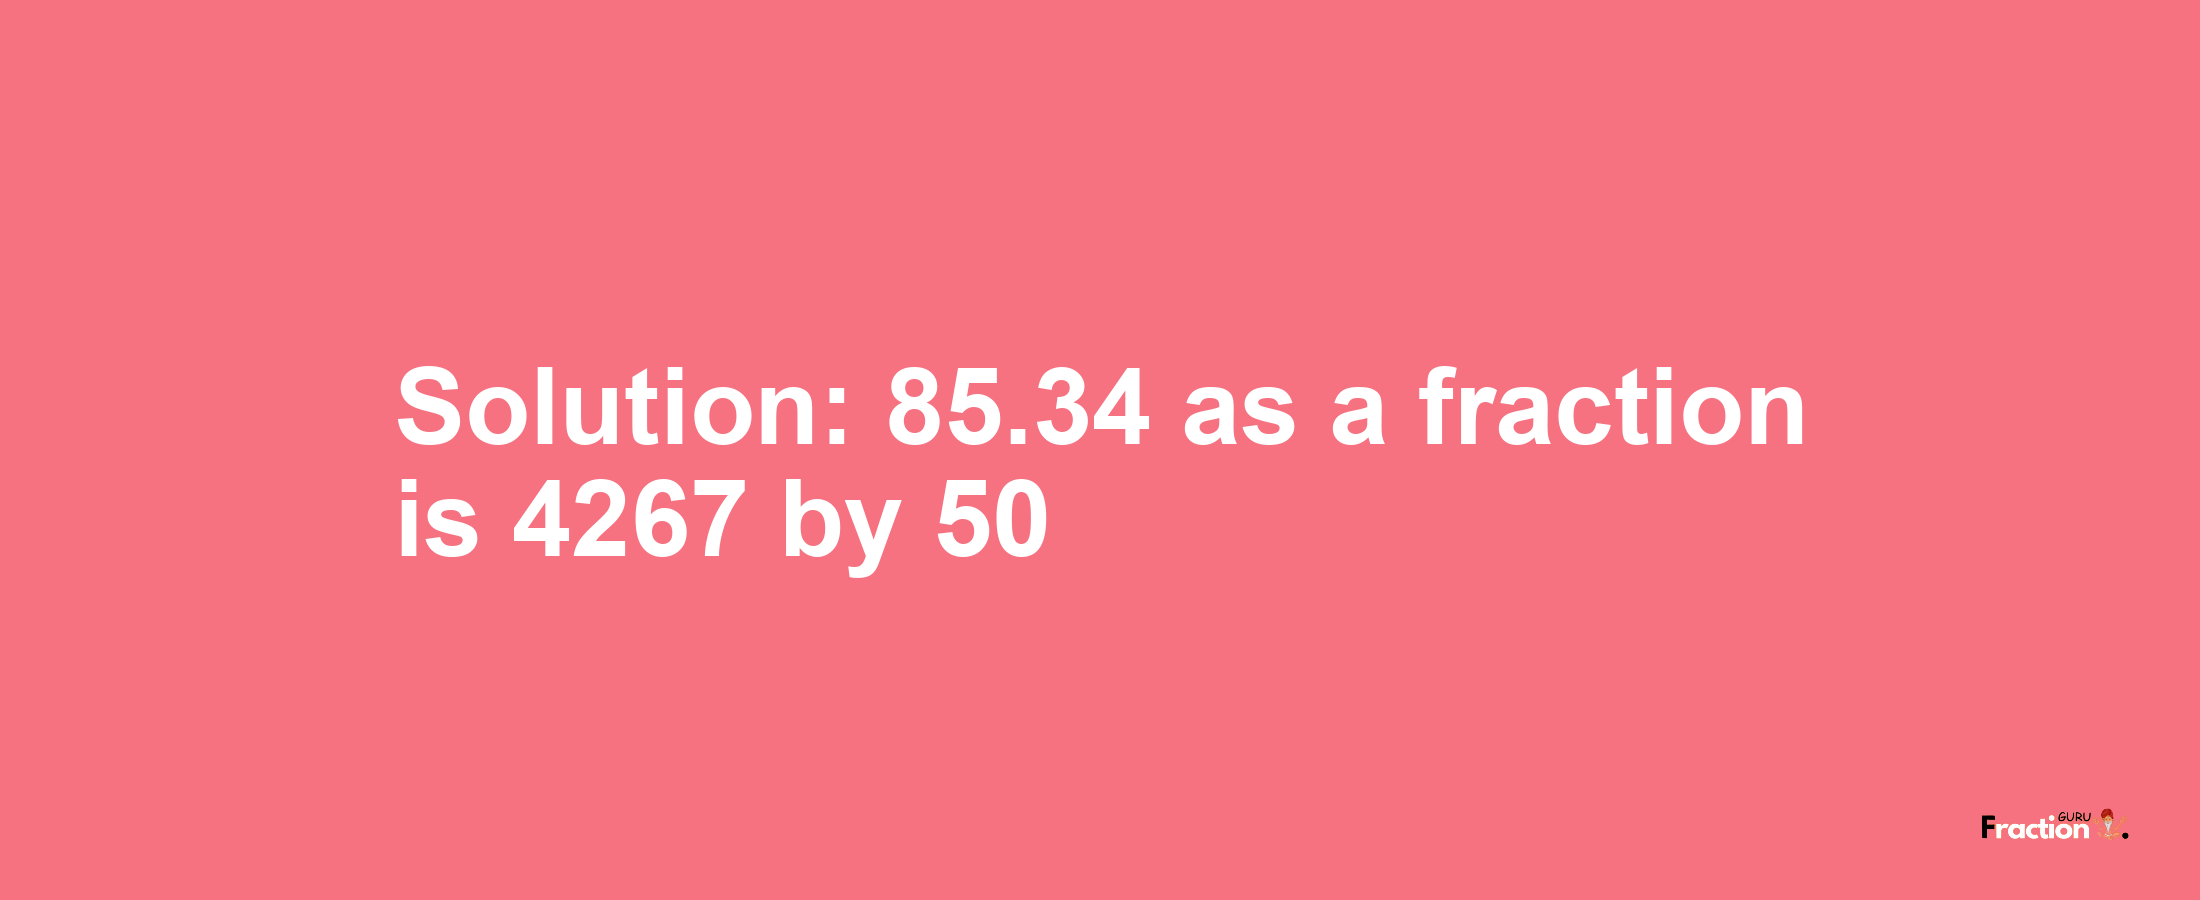 Solution:85.34 as a fraction is 4267/50